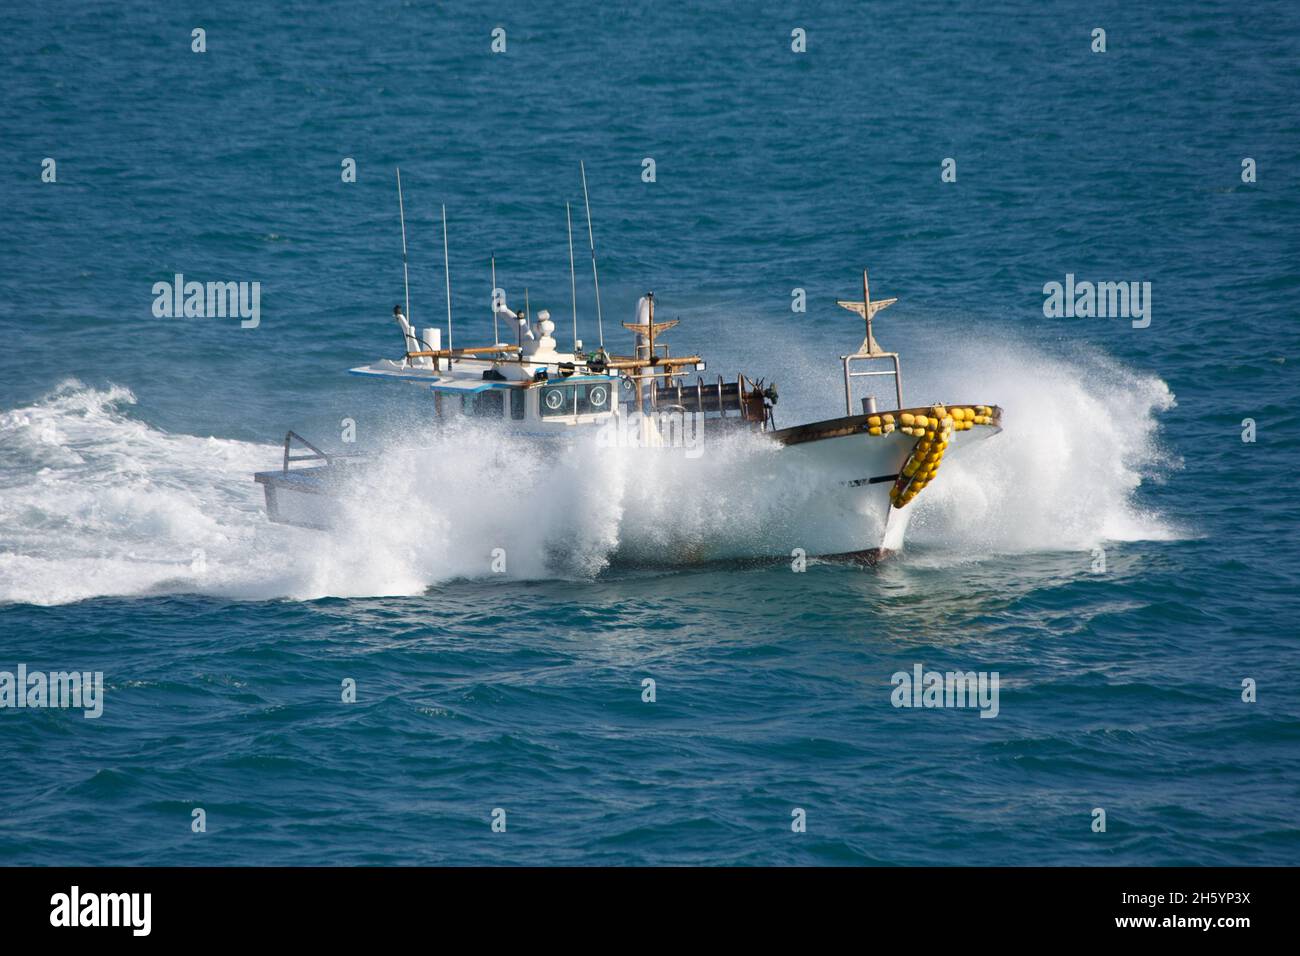 The fishing boat in sea splashes, floats with high speed. Stock Photo